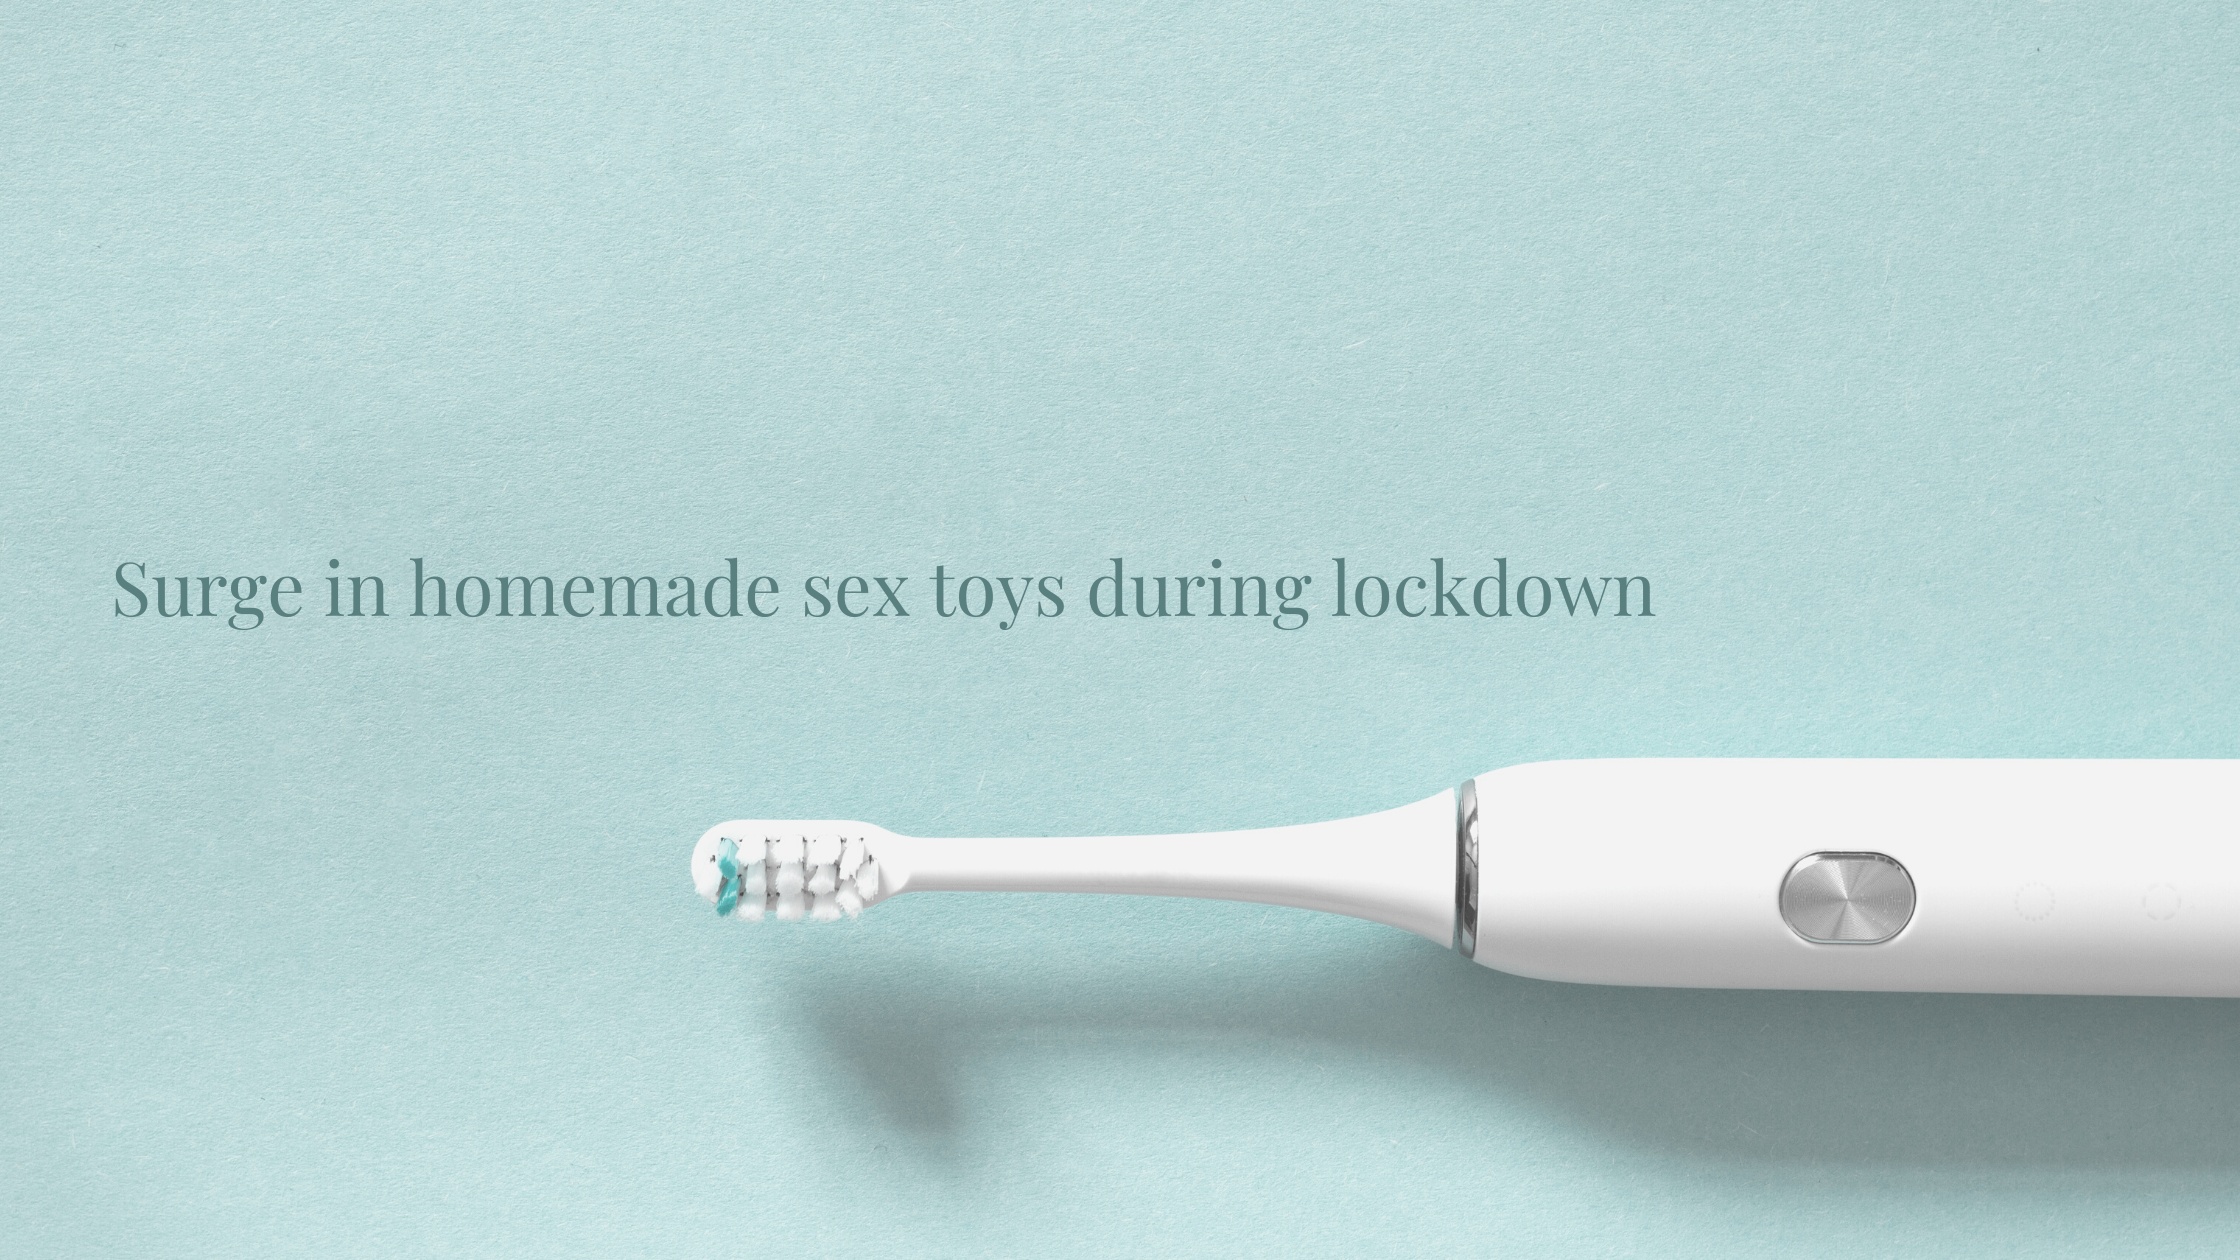 Surge in homemade sex toys during lockdown picture